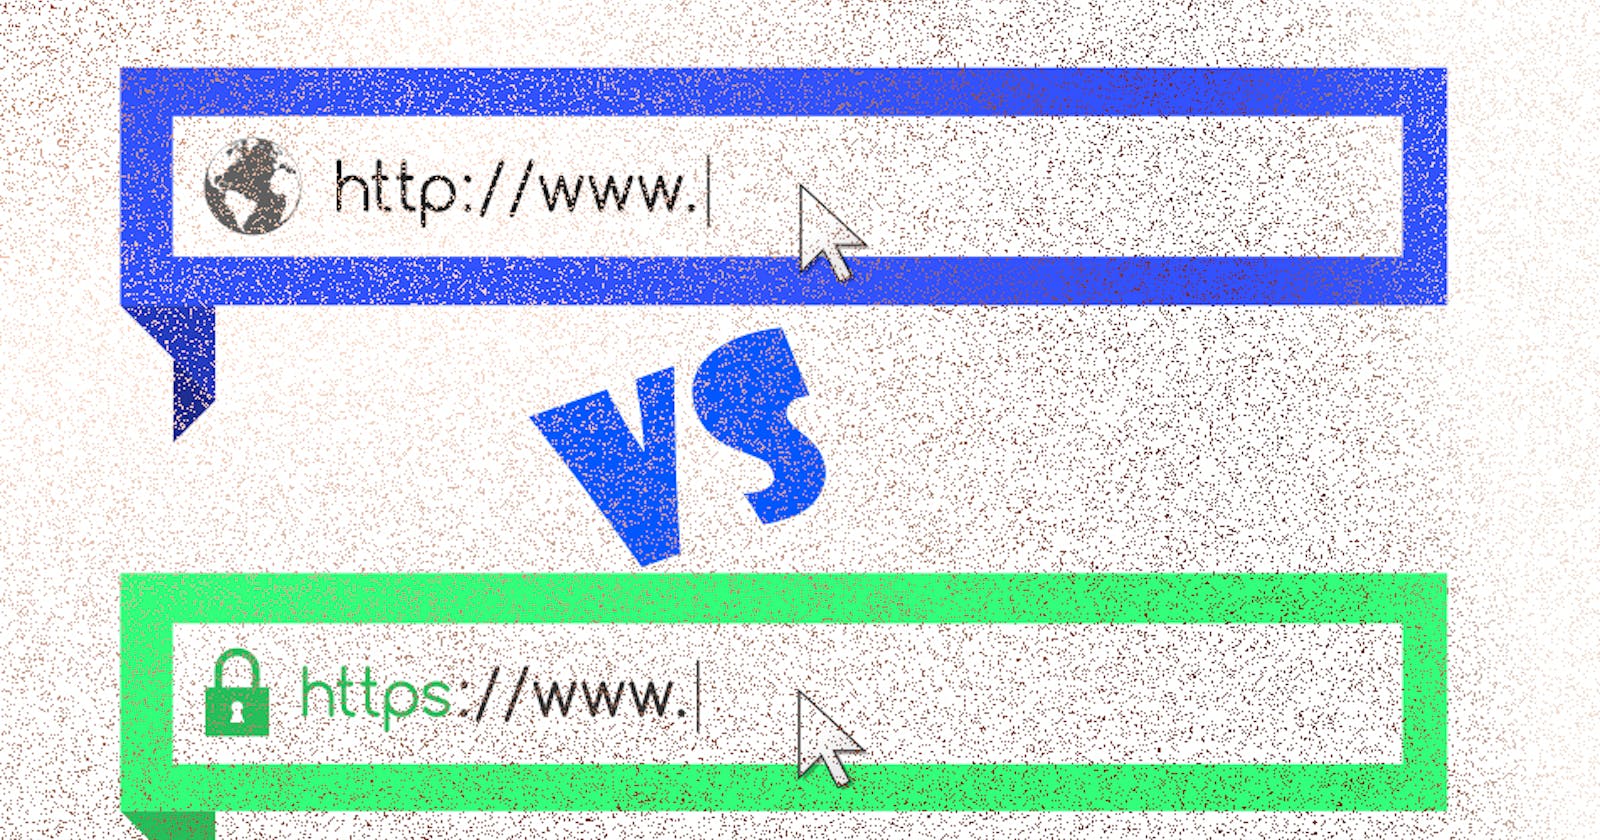 "HTTP vs HTTPS: The Secure Web Connection Revolution"